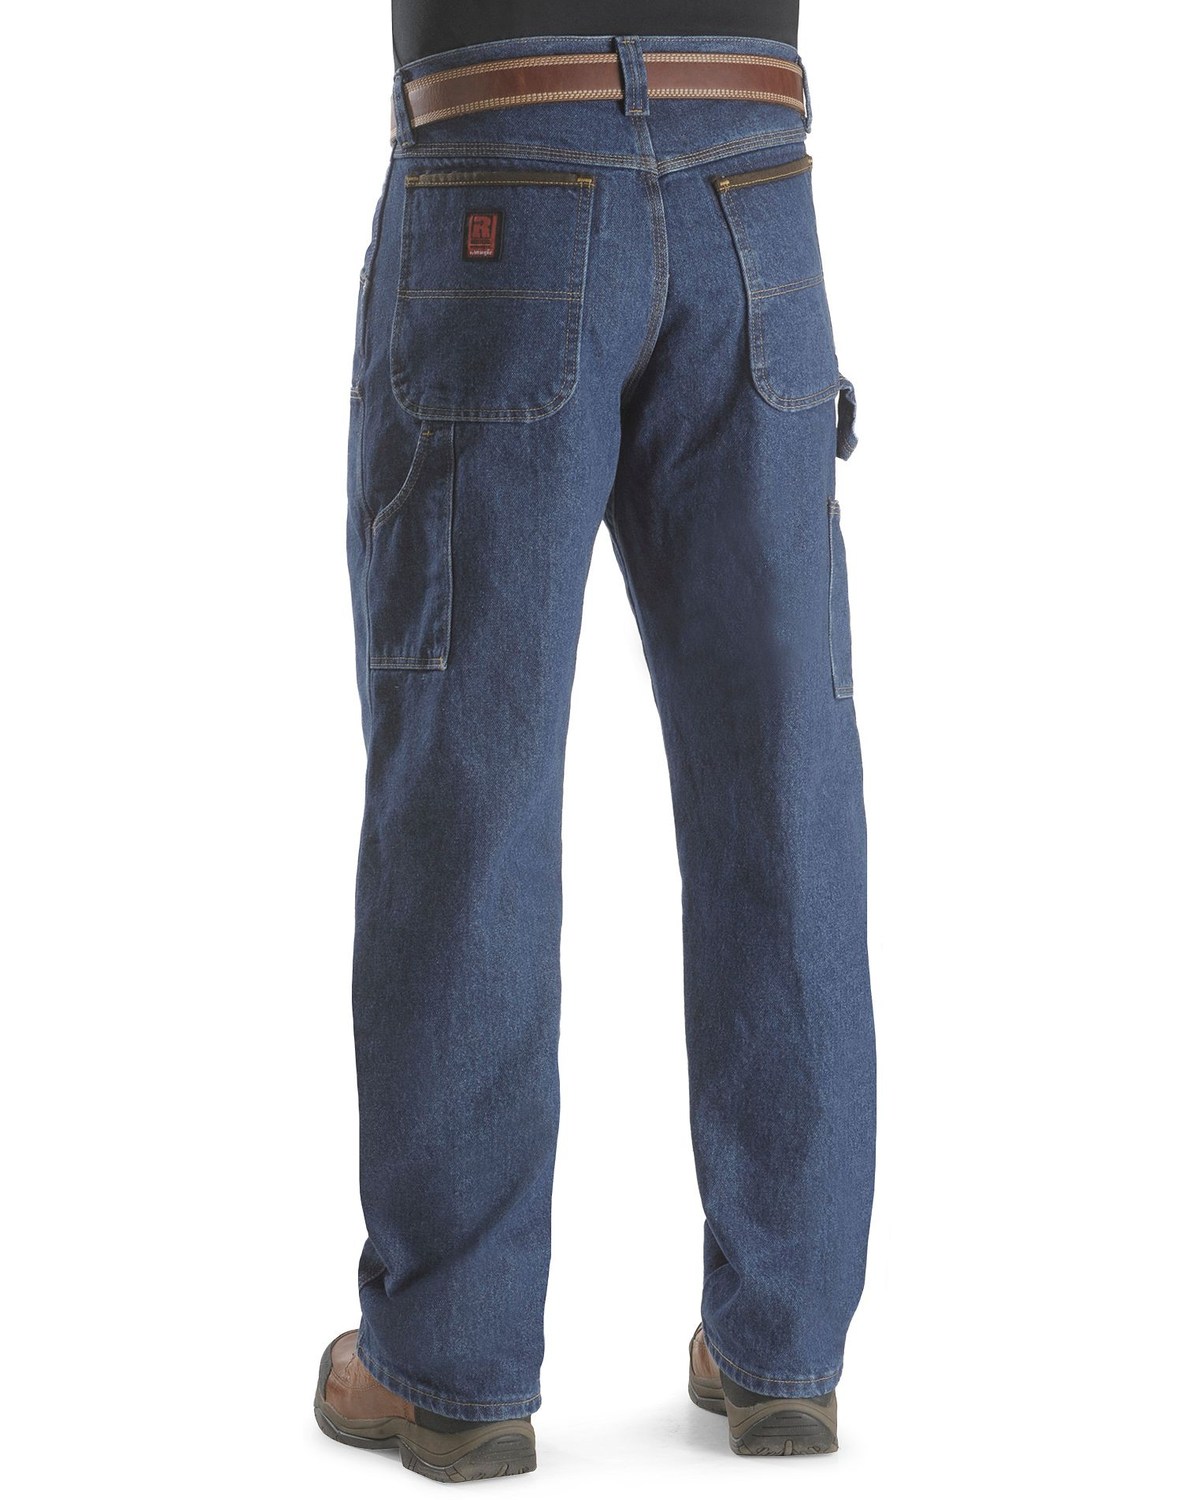 Riggs Workwear Men's Utility Work Jeans | Boot Barn